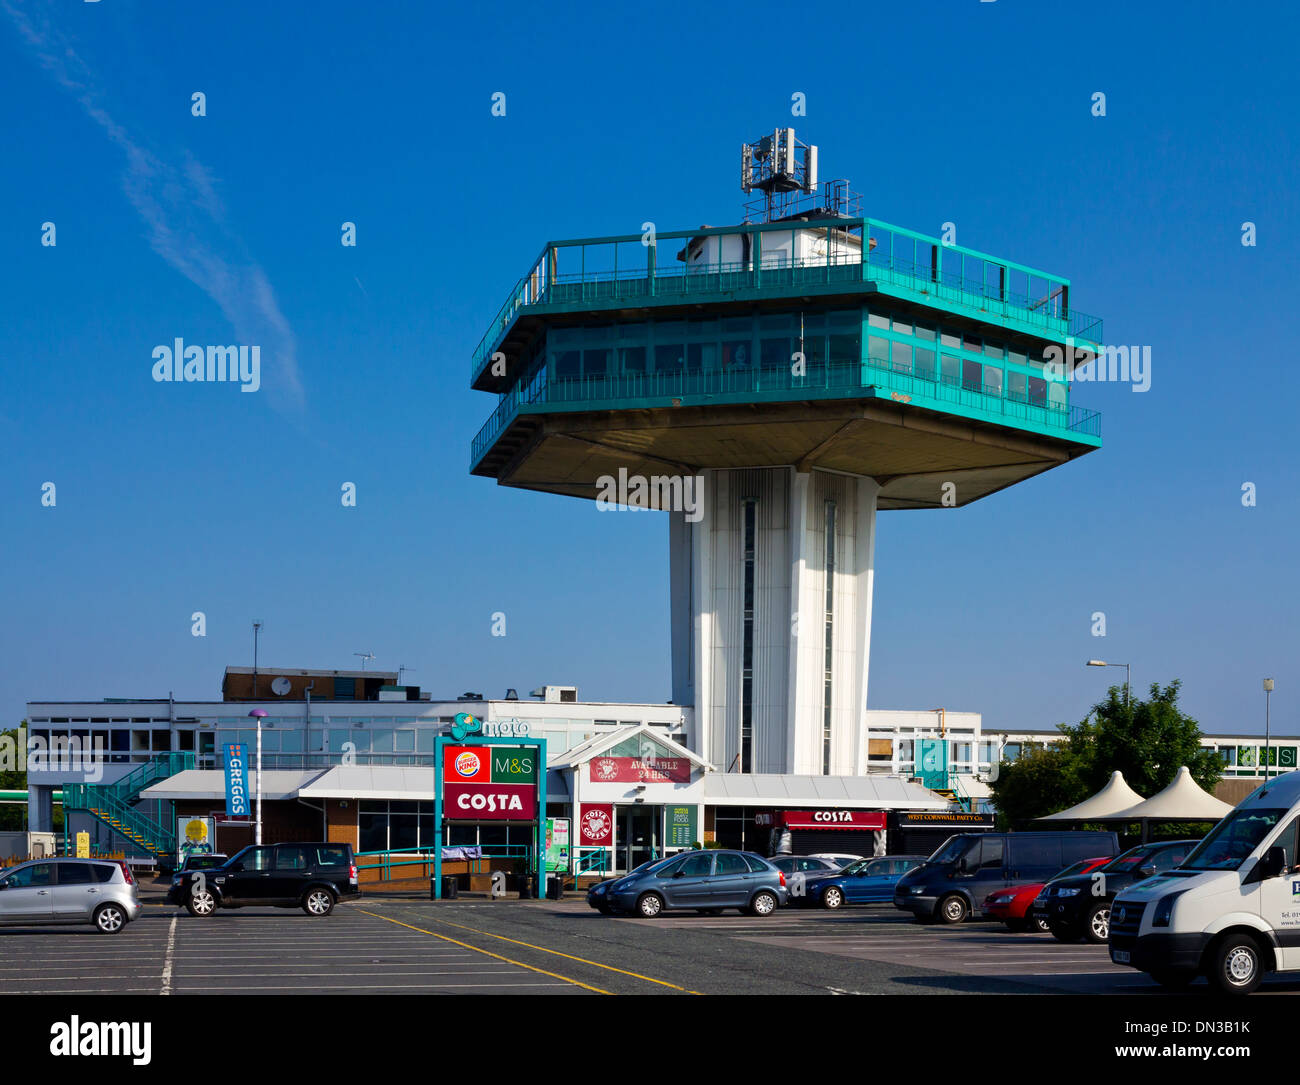 The hexagonal Pennine Tower at Lancaster Forton Moto Services on the M6 Motorway Lancashire England UK built 1965 listed in 2012 Stock Photo